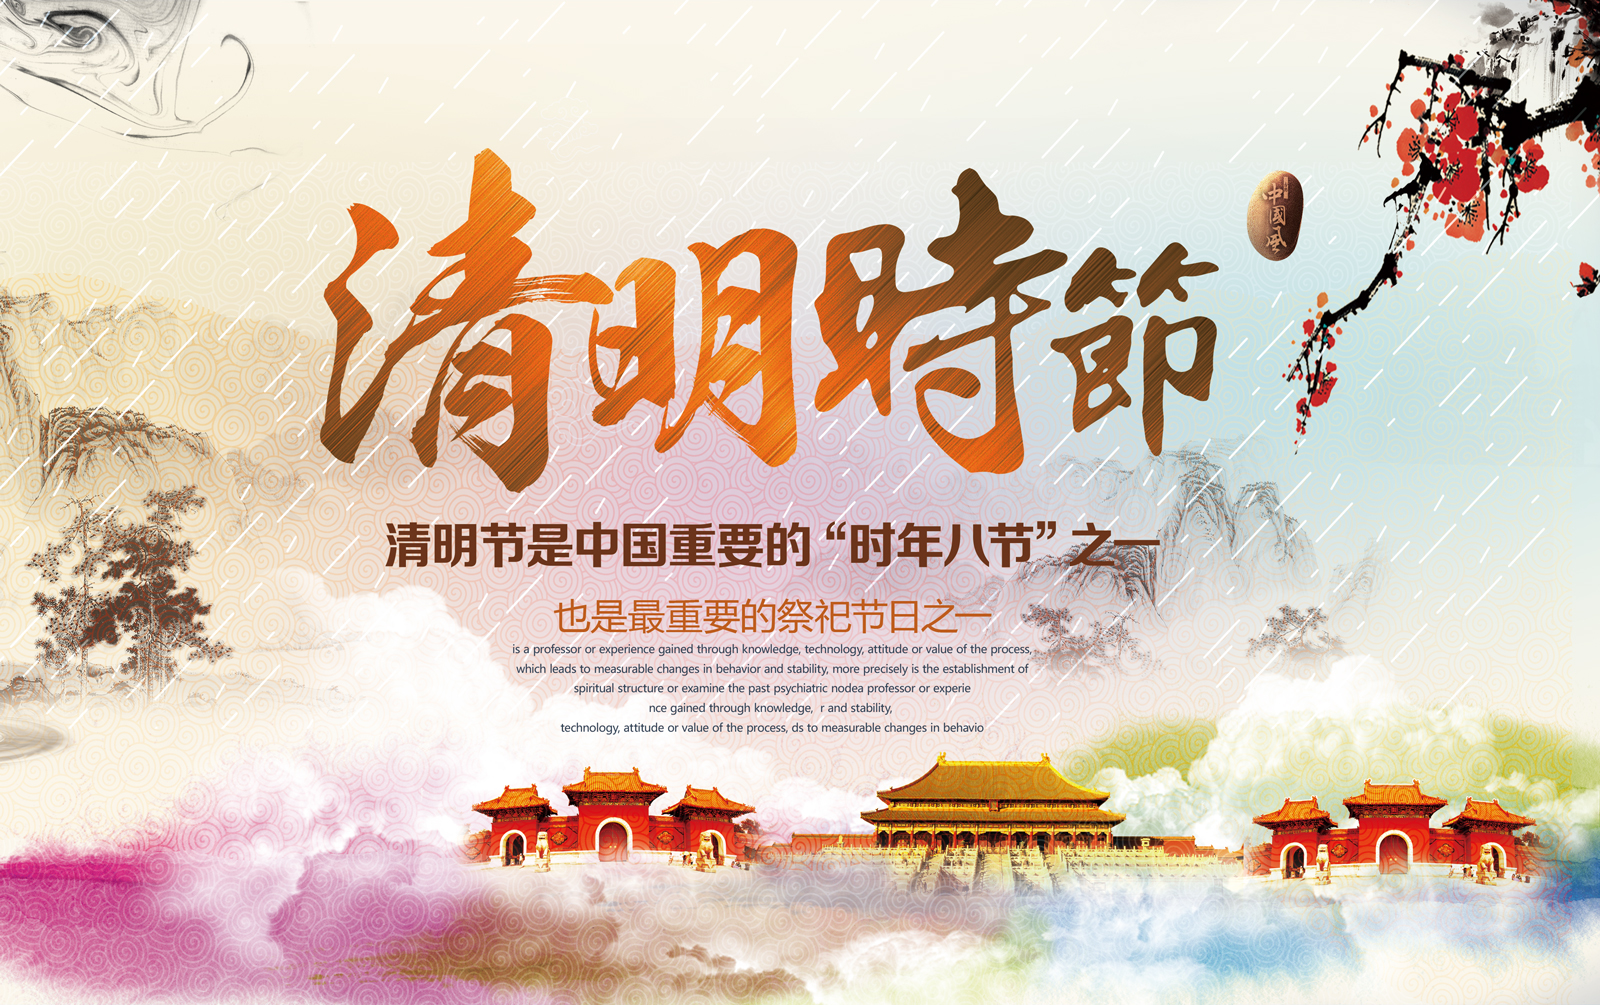 Tomb-sweeping day poster PSD material China PSD File Free Download